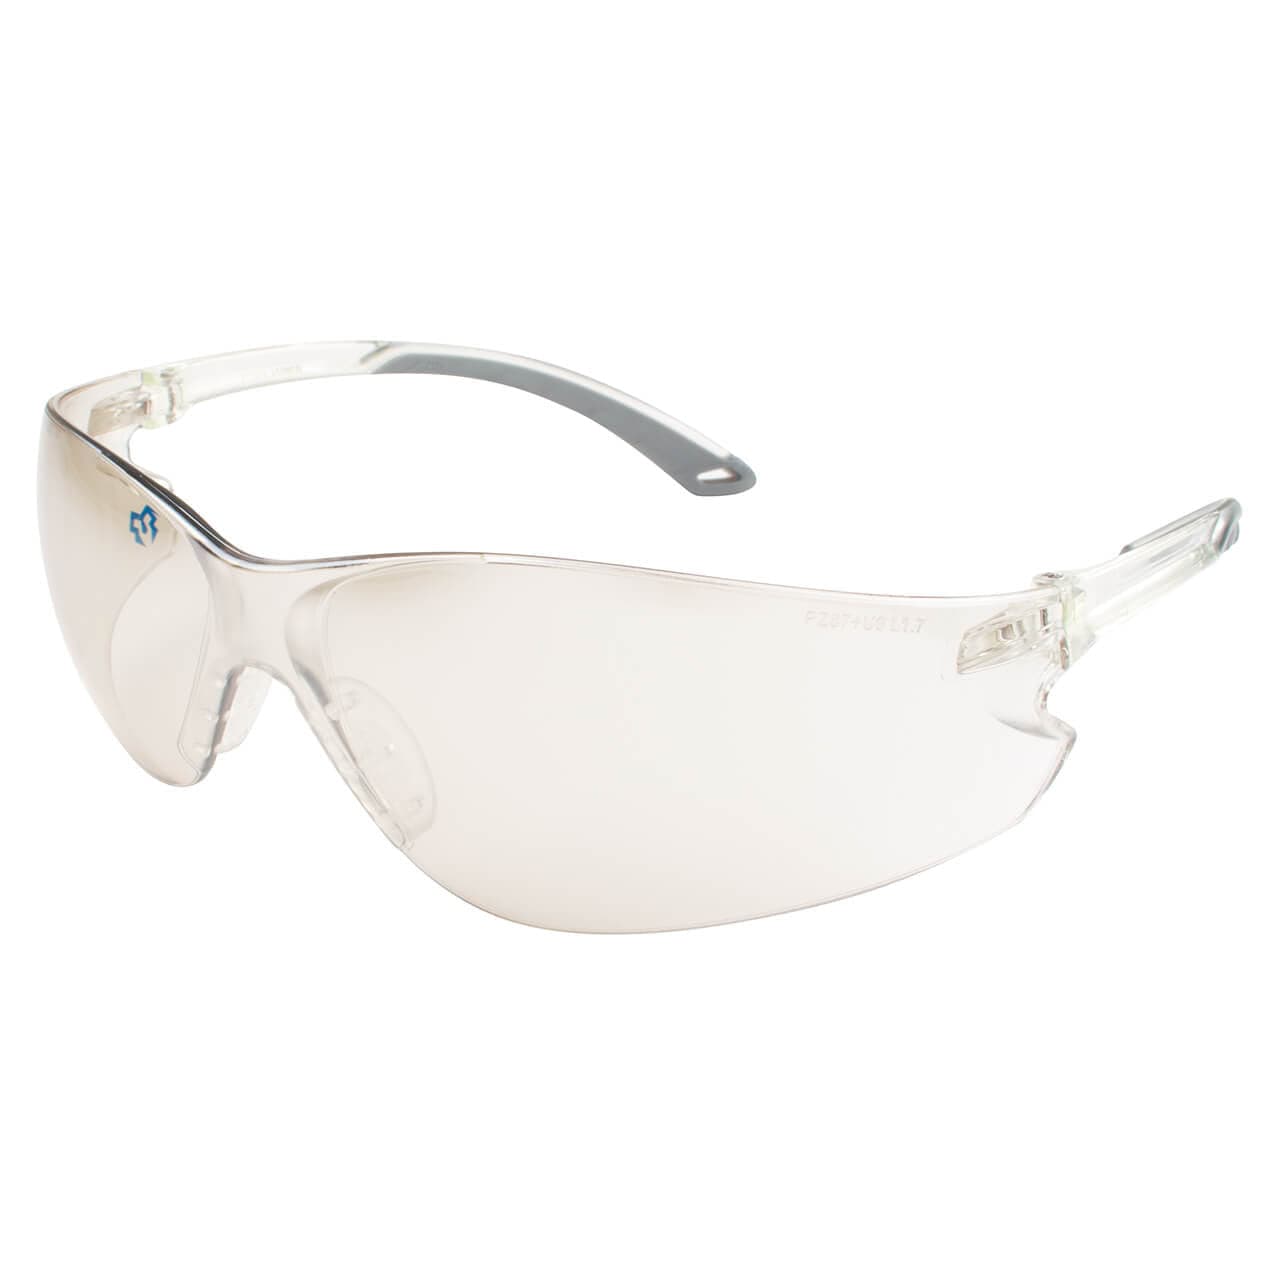 Metel M20 Safety Glasses with Indoor/Outdoor Mirror Lenses